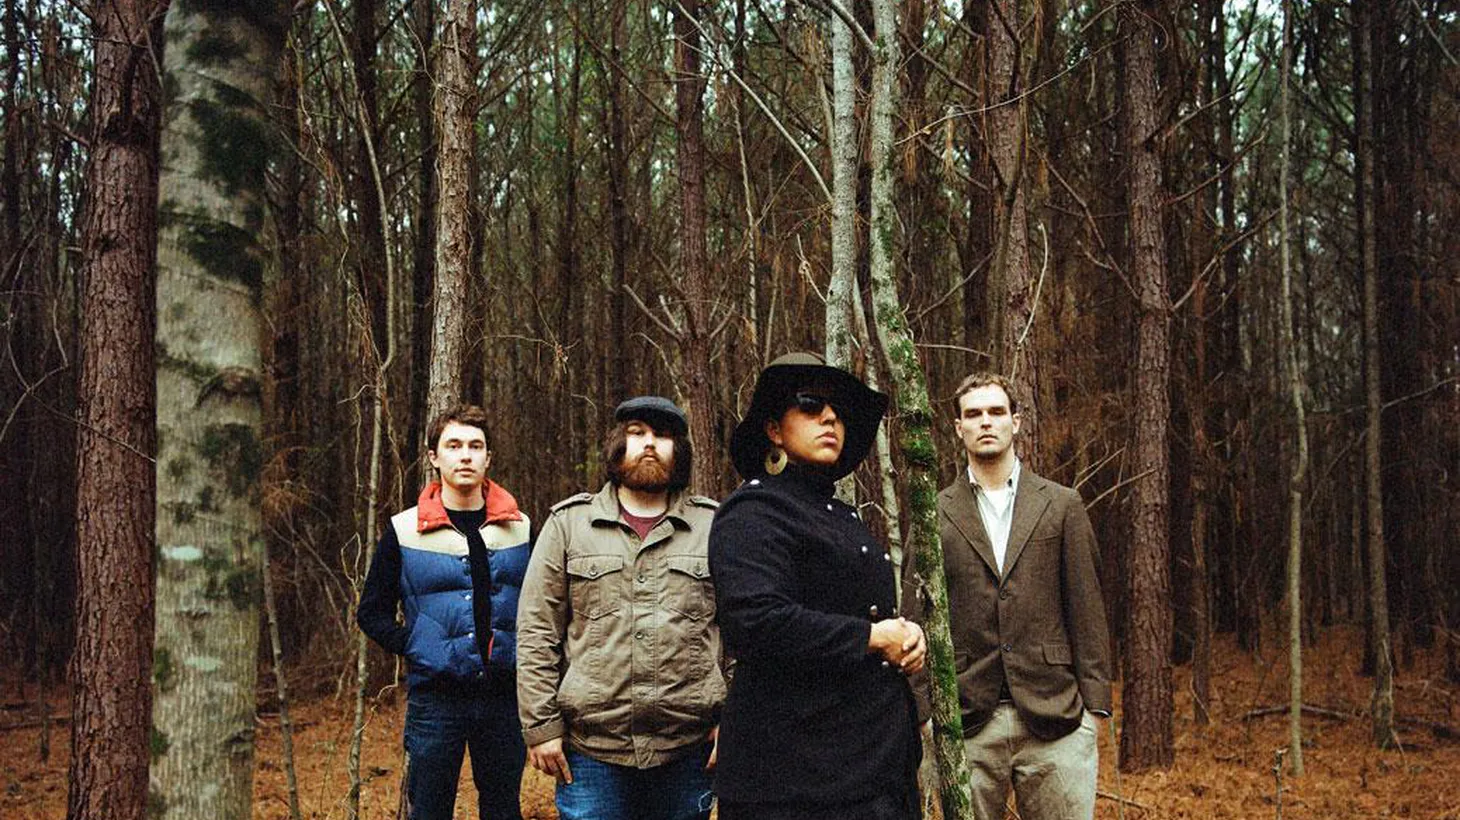 Alabama Shakes is one of the most buzzed about bands in indie music right now and for good reason.